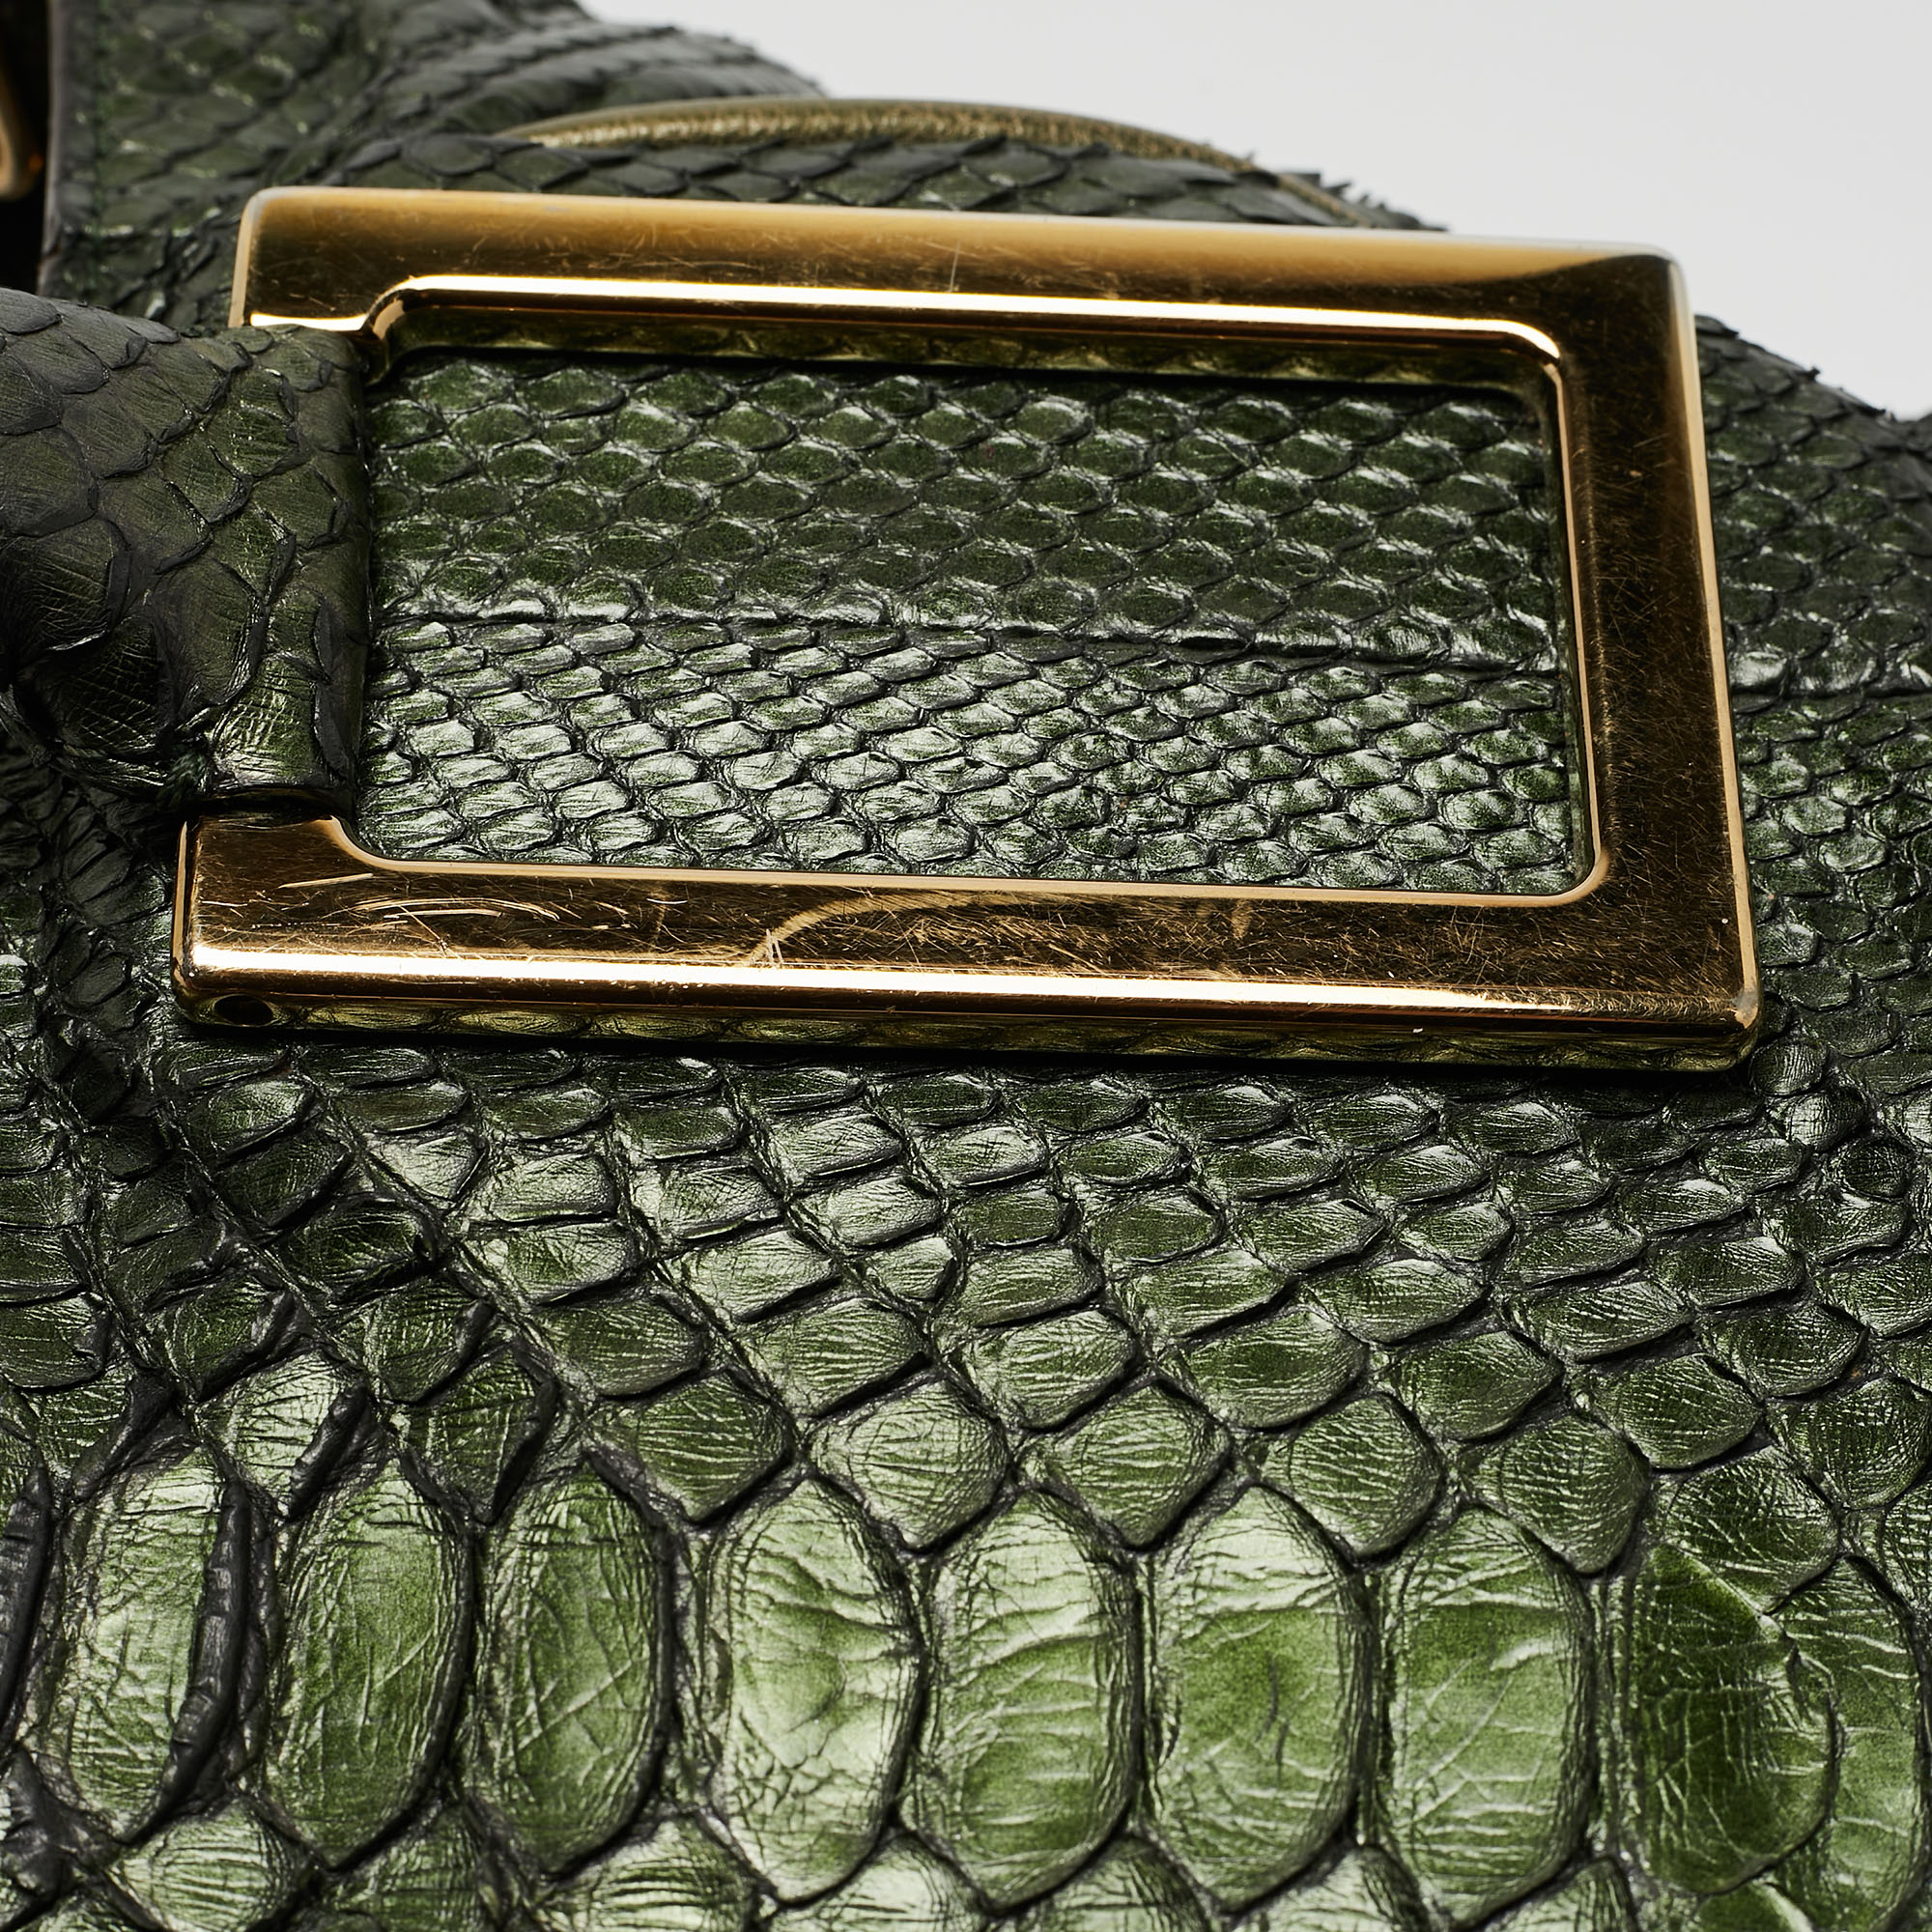 Chloe Green Python And Leather Ethel Tote